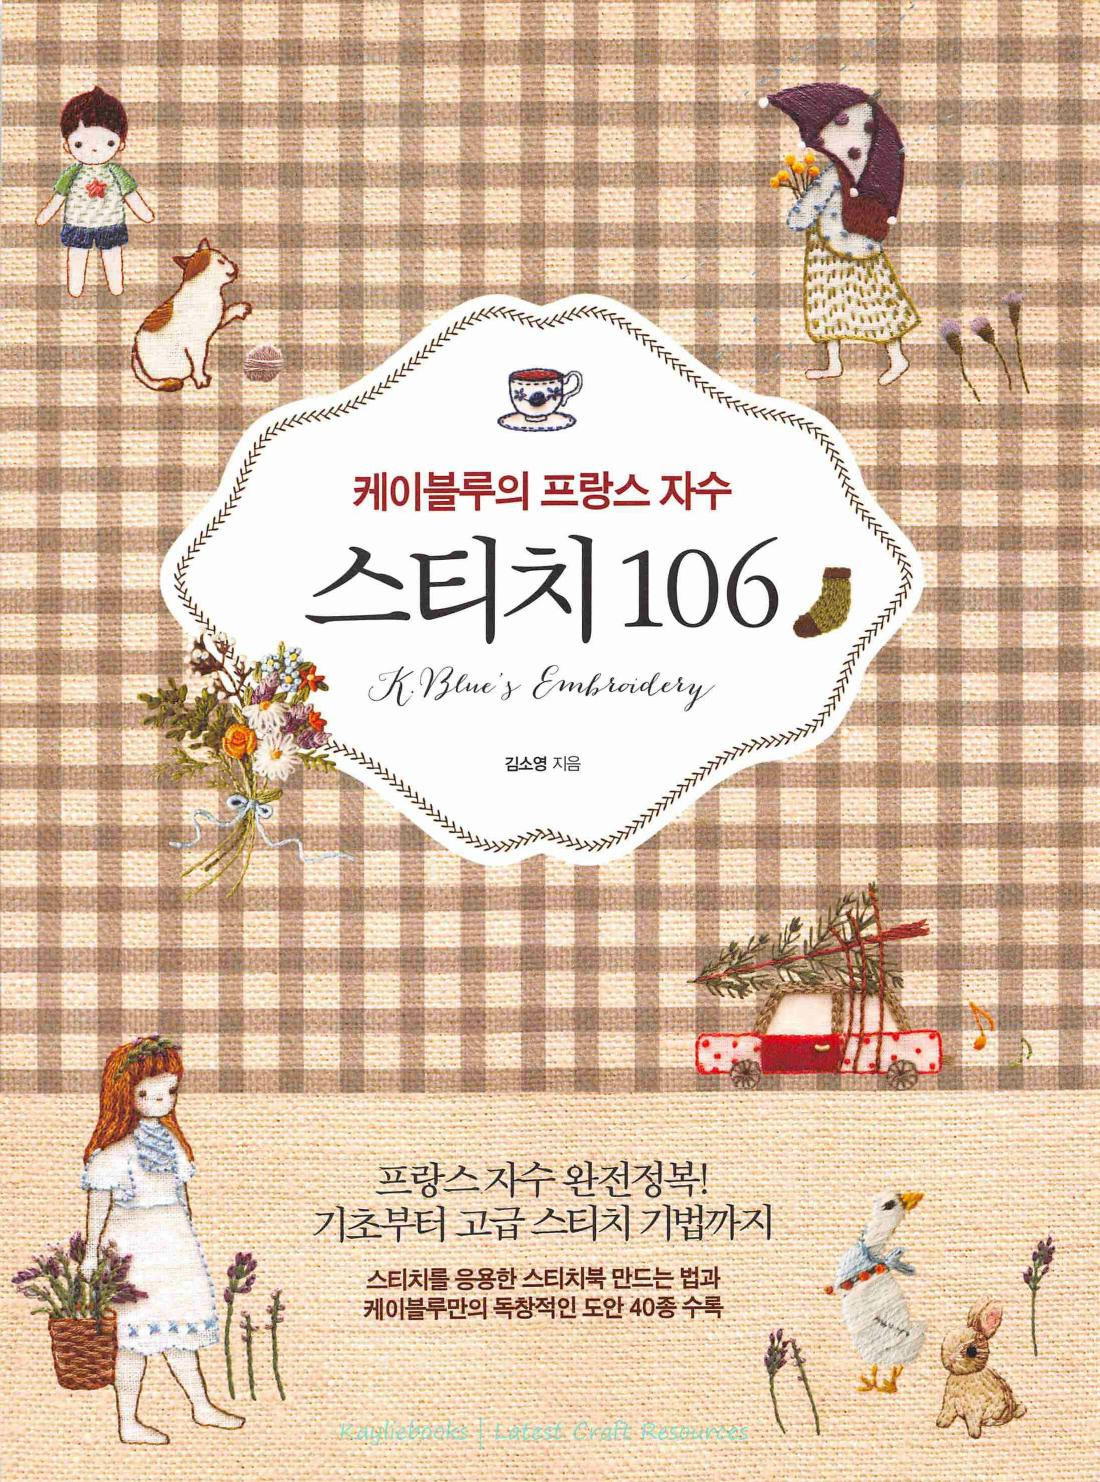 Korean Embroidery Patterns 106 Hand Embroidery Designs Kblue Kayliebooks